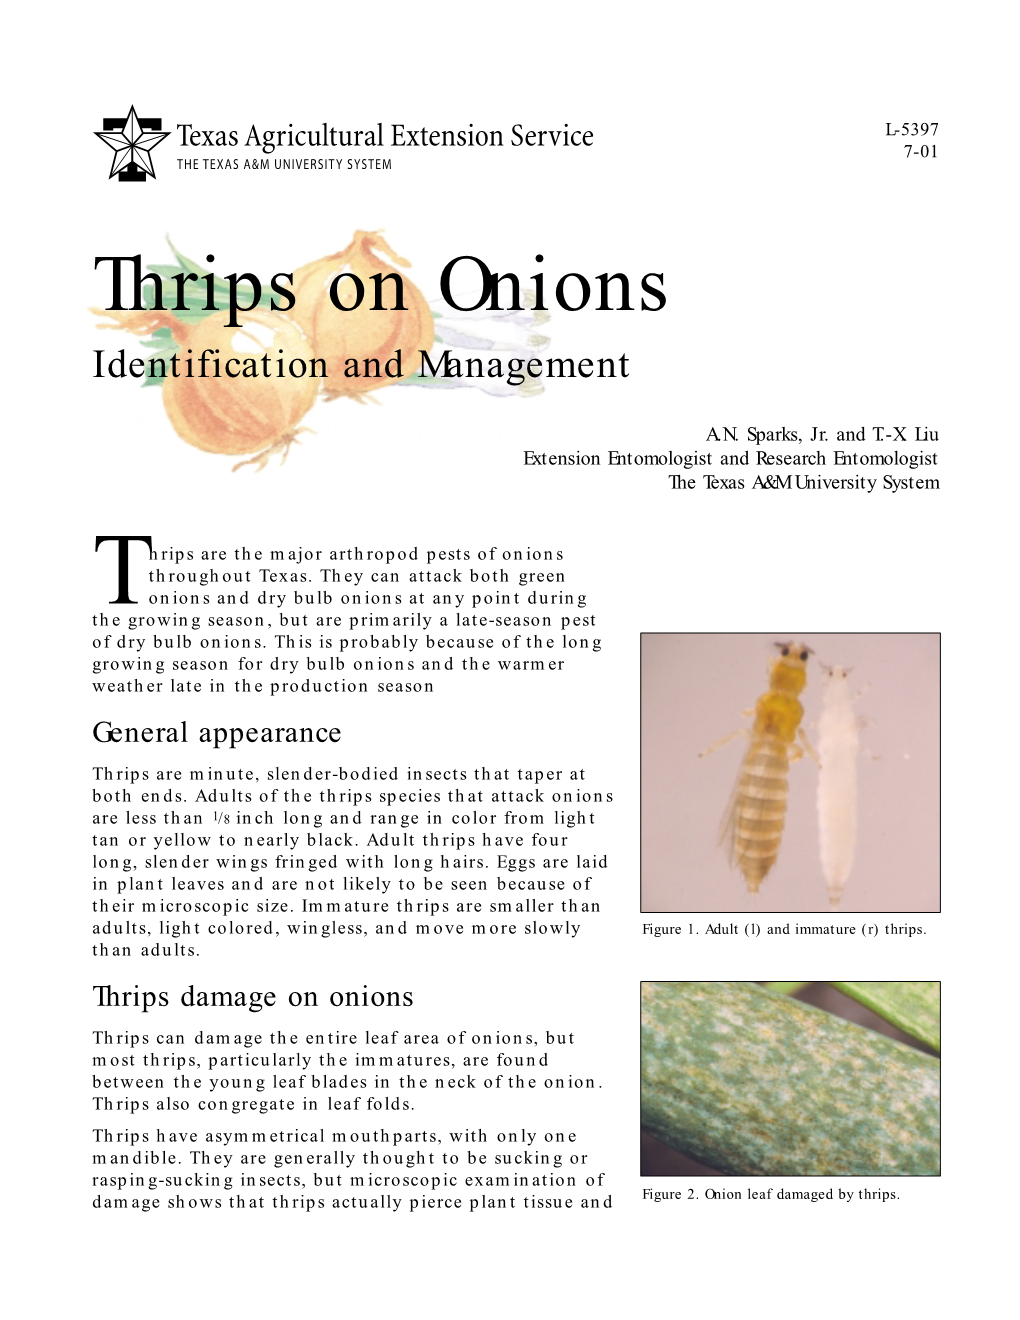 Thrips on Onions Identification and Management